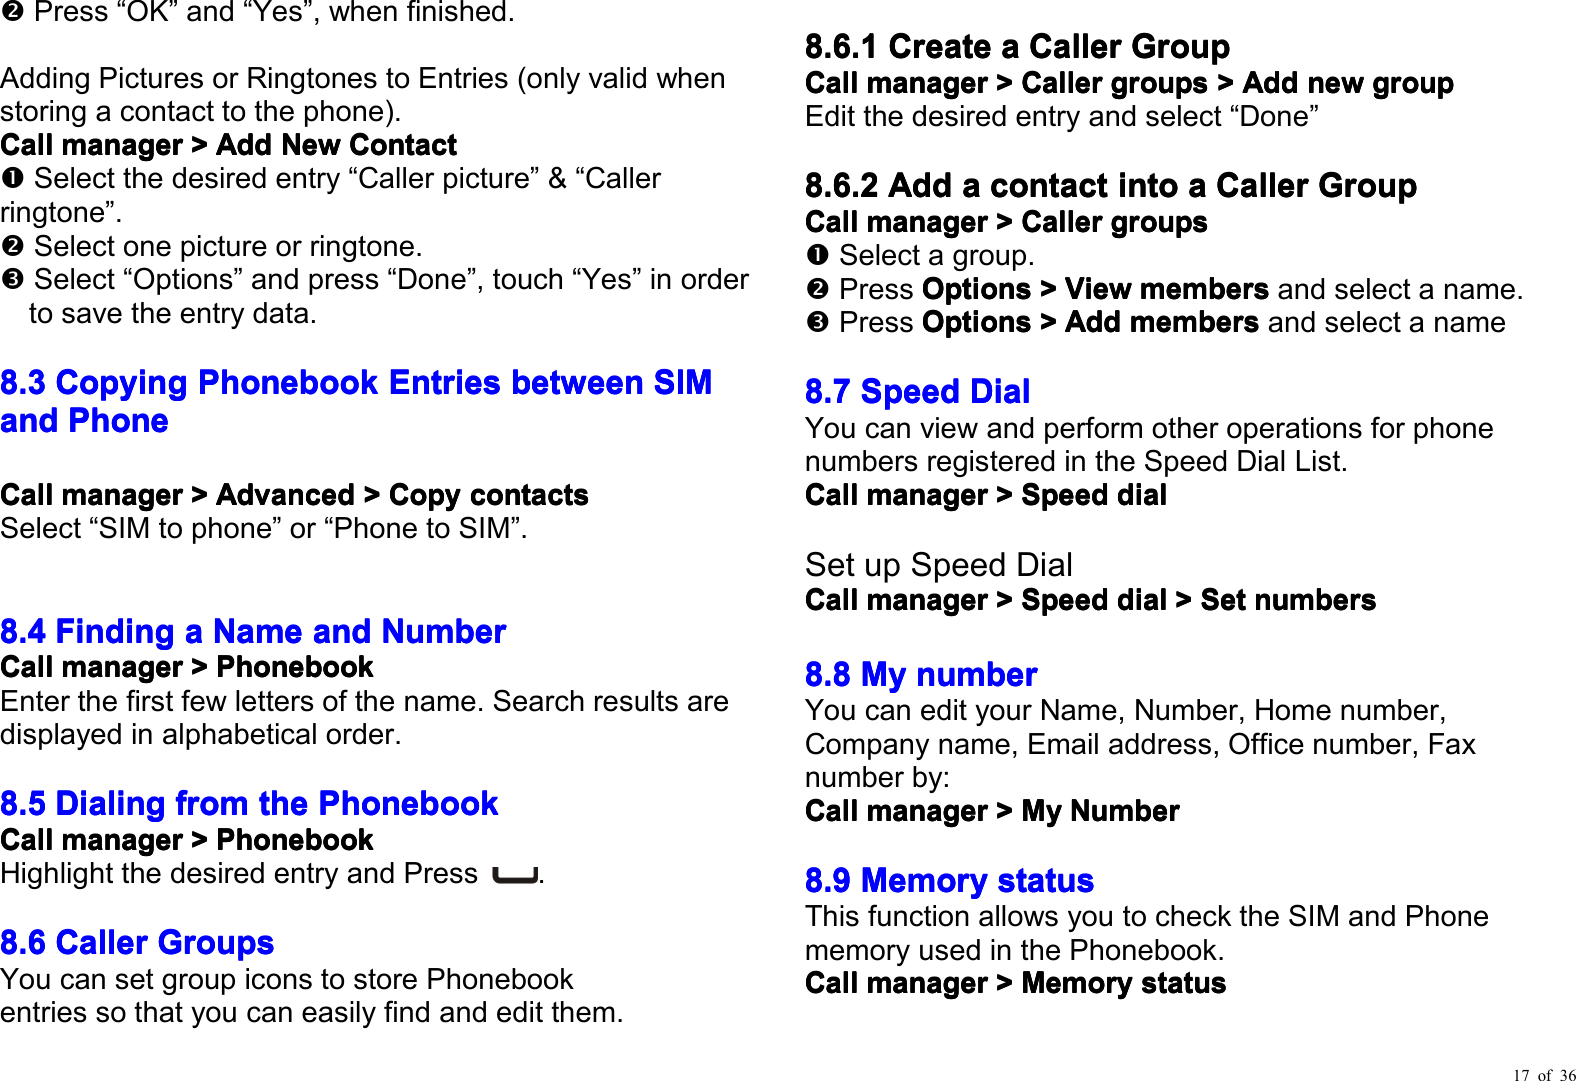 17 of 36Press “ OK ” and “ Yes ” , when finished .Adding Pictures or Ringtones to Entries (only valid whenstoring a contact to the phone) .CallCallCallCallmmmmanageranageranageranager&gt;&gt;&gt;&gt;AddAddAddAddNewNewNewNewContactContactContactContactSelect the desired entry “ Caller picture ” &amp; “ Callerringtone ” .S elect one picture or ringtone.Select “ Op tions ” and press “ Done ” , touch “ Yes ” in orderto save the entry data .8.38.38.38.3CopyingCopyingCopyingCopyingPhonebookPhonebookPhonebookPhonebookEntriesEntriesEntriesEntriesbetweenbetweenbetweenbetweenSIMSIMSIMSIMandandandandPhonePhonePhonePhoneCallCallCallCallmmmmanageranageranageranager&gt;&gt;&gt;&gt;AdvancedAdvancedAdvancedAdvanced&gt;&gt;&gt;&gt;CopyCopyCopyCopycontactscontactscontactscontactsSelect “ SIM to phone ” or “ Phone to SIM ” .8.48.48.48.4FindingFindingFindingFindingaaaaNameNameNameNameandandandandNumberNumberNumberNumberCallCallCallCallmmmmanageranageranageranager&gt;&gt;&gt;&gt;PhonebookPhonebookPhonebookPhonebookEnter the first few letters of the name. Search results aredisplayed in alphabetical order.8.58.58.58.5DialingDialingDialingDialingfromfromfromfromthethethethePhonebookPhonebookPhonebookPhonebookCallCallCallCallmmmmanageranageranageranager&gt;&gt;&gt;&gt;PhonebookPhonebookPhonebookPhonebookHighlight the desired entry and Press .8.68.68.68.6CallerCallerCallerCallerGroupsGroupsGroupsGroupsYou can set group icons to stor e Phonebookentries so that you can easily find and edit them.8.6.18.6.18.6.18.6.1CreateCreateCreateCreateaaaaCallerCallerCallerCallerGroupGroupGroupGroupCallCallCallCallmmmmanageranageranageranager&gt;&gt;&gt;&gt;CallerCallerCallerCallergroupsgroupsgroupsgroups&gt;&gt;&gt;&gt;AddAddAddAddnewnewnewnewgroupgroupgroupgroupEdit the desired entry and select “ Done ”8.6.28.6.28.6.28.6.2AddAddAddAddaaaacontactcontactcontactcontactintointointointoaaaaCallerCallerCallerCallerGroupGroupGroupGroupCallCallCallCallmmmmanageranageranageranager&gt;&gt;&gt;&gt;CallerCallerCallerCallergroupsgroupsgroupsgroupsS elect a group.Press OptionsOptionsOptionsOptions&gt;&gt;&gt;&gt;ViewViewViewViewmembersmembersmembersmembersand select a name.Press OptionsOptionsOptionsOptions&gt;&gt;&gt;&gt;AddAddAddAddmembersmembersmembersmembersand select a name8.78.78.78.7SpeedSpeedSpeedSpeedDialDialDialDialYou can view and perform other operations for phonen umbers registered in the Speed Dial List.CallCallCallCallmmmmanageranageranageranager&gt;&gt;&gt;&gt;SpeedSpeedSpeedSpeedddddialialialialSet up Speed DialCallCallCallCallmmmmanageranageranageranager&gt;&gt;&gt;&gt;SpeedSpeedSpeedSpeedddddialialialial&gt;&gt;&gt;&gt;SetSetSetSetnumbersnumbersnumbersnumbers8.88.88.88.8MyMyMyMynnnnumberumberumberumberYou can edit your Name, Number, Home number,Company name, Email address, Office number, Faxnumber by:CallCallCallCallmmmmanageranageranageranager&gt;&gt;&gt;&gt;MyMyMyMyNumberNumberNumberNumber8.98.98.98.9MemoryMemoryMemoryMemorysssstatustatustatustatusThis function allows you to check the SIM and Phonememory used in the Phonebook.CallCallCallCallmmmmanageranageranageranager&gt;&gt;&gt;&gt;MemoryMemoryMemoryMemorystatusstatusstatusstatus